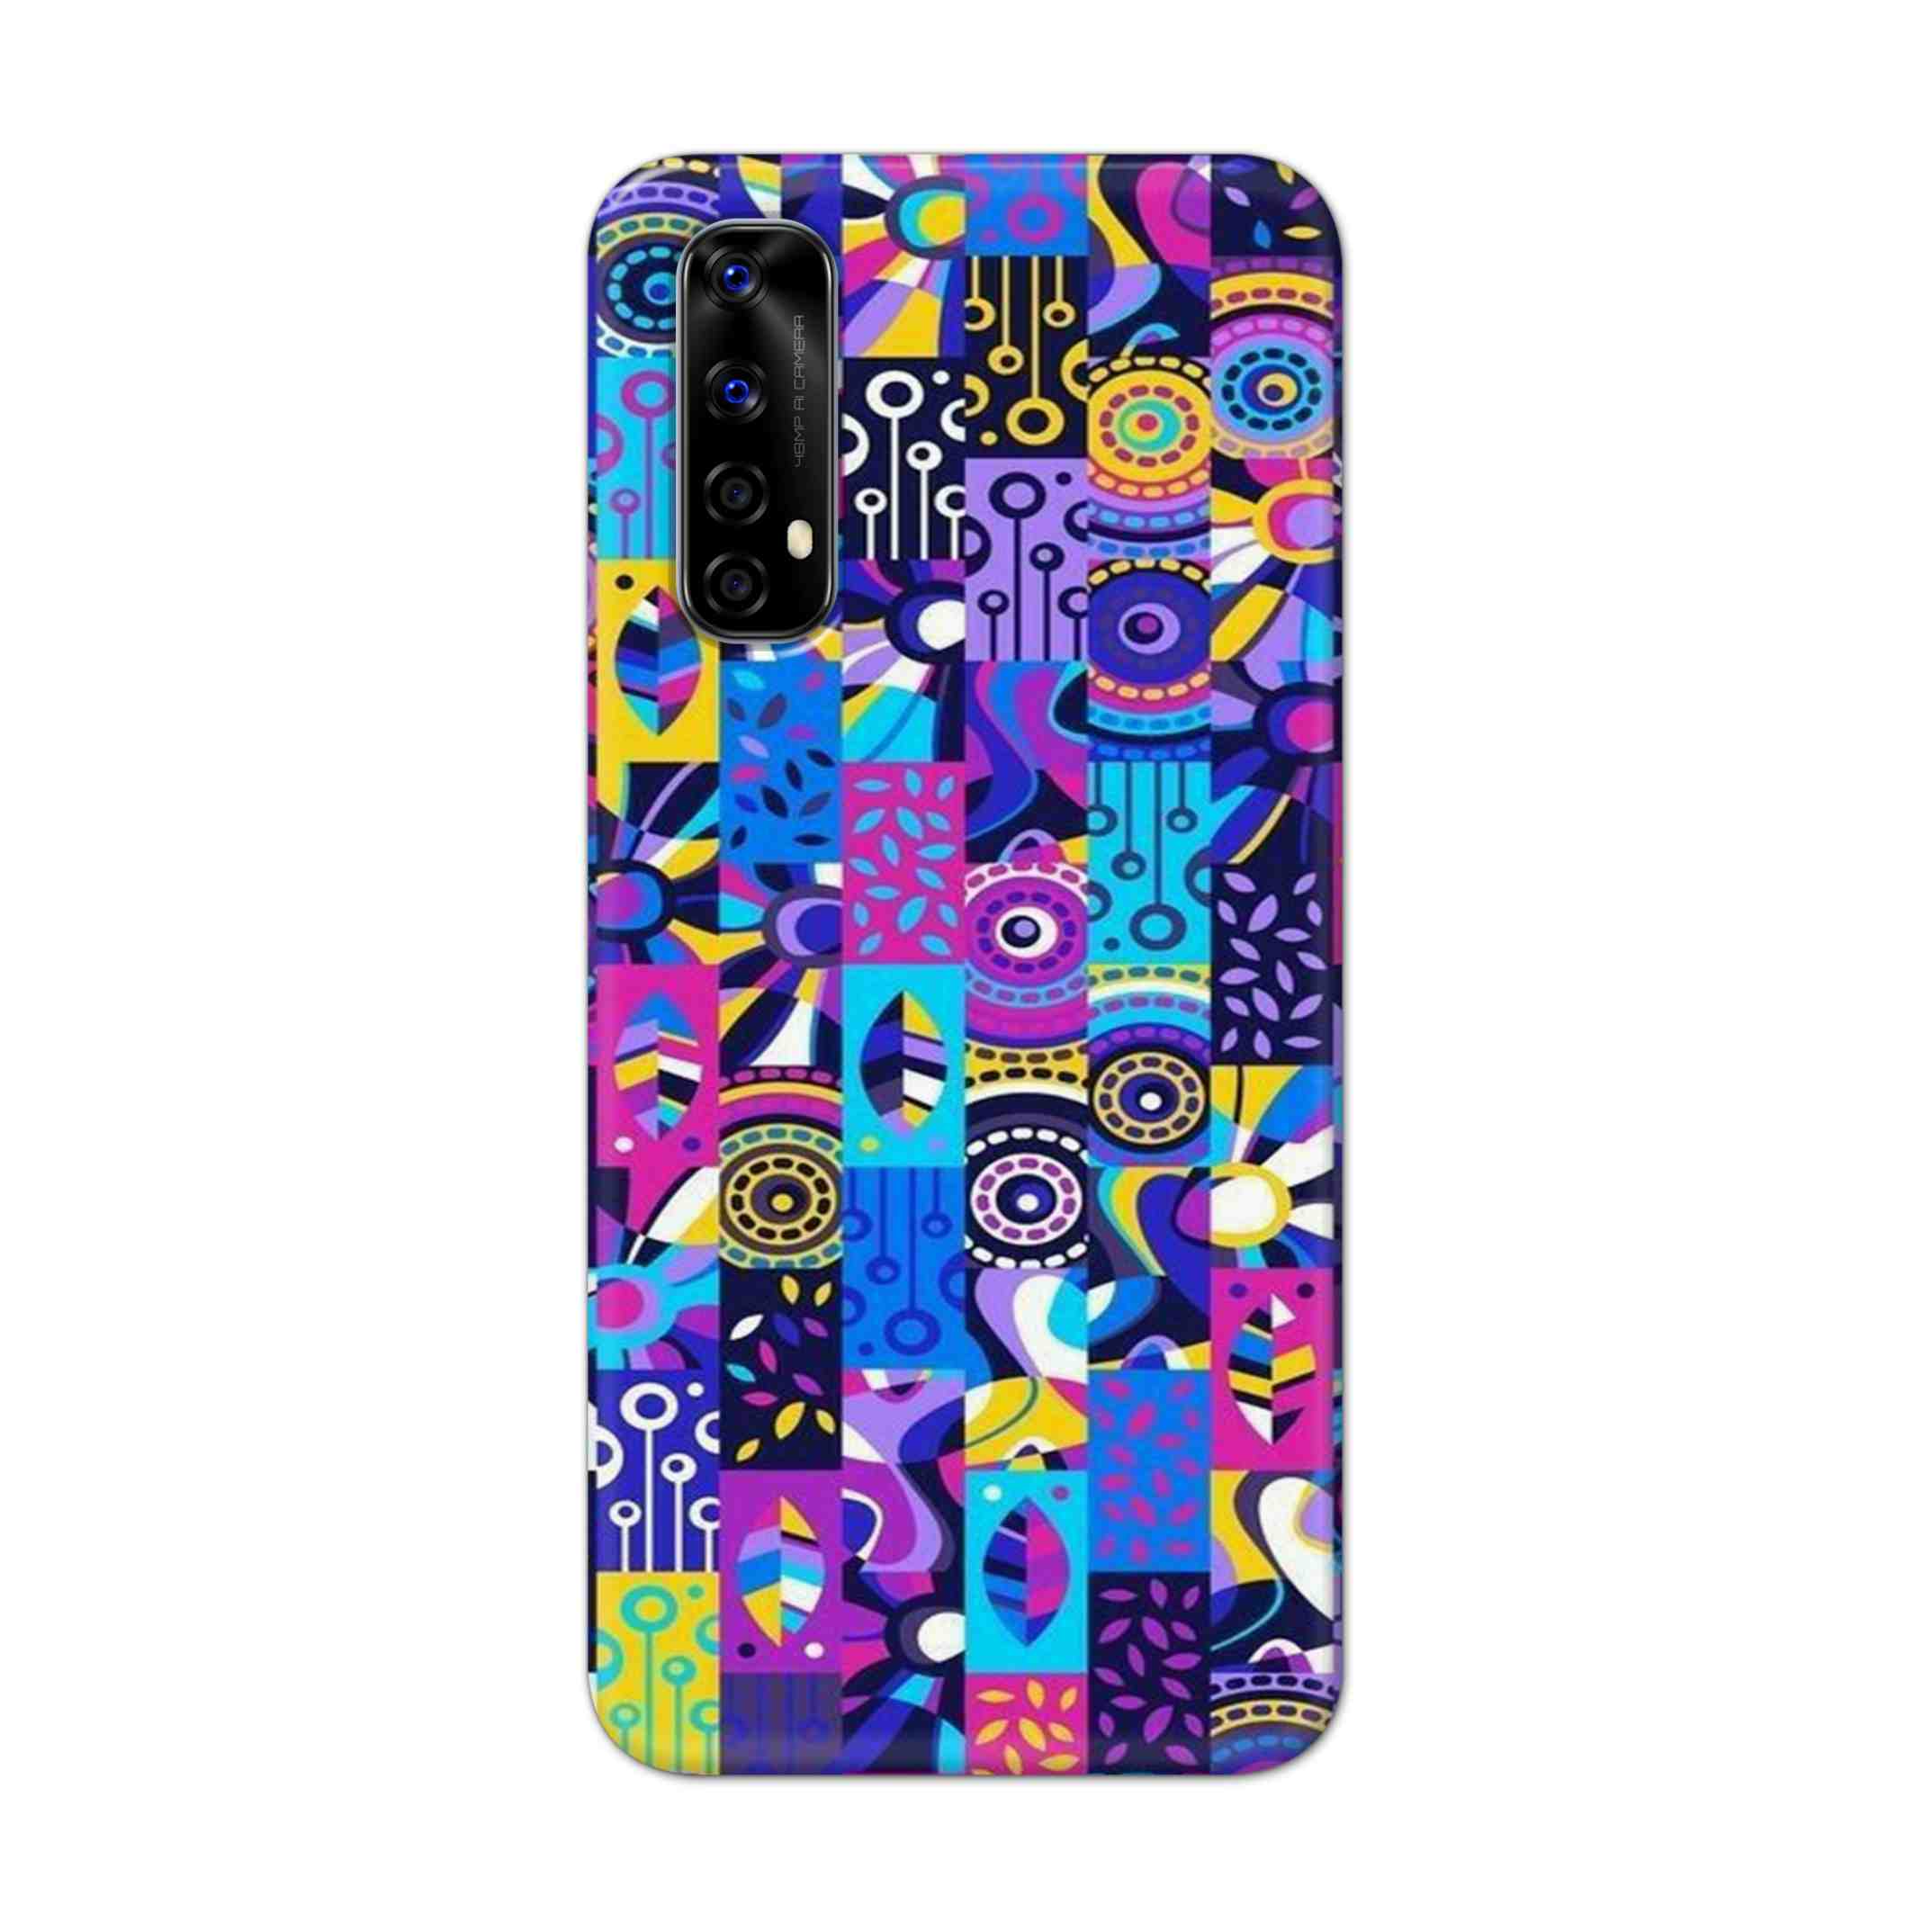 Buy Rainbow Art Hard Back Mobile Phone Case Cover For Realme Narzo 20 Pro Online